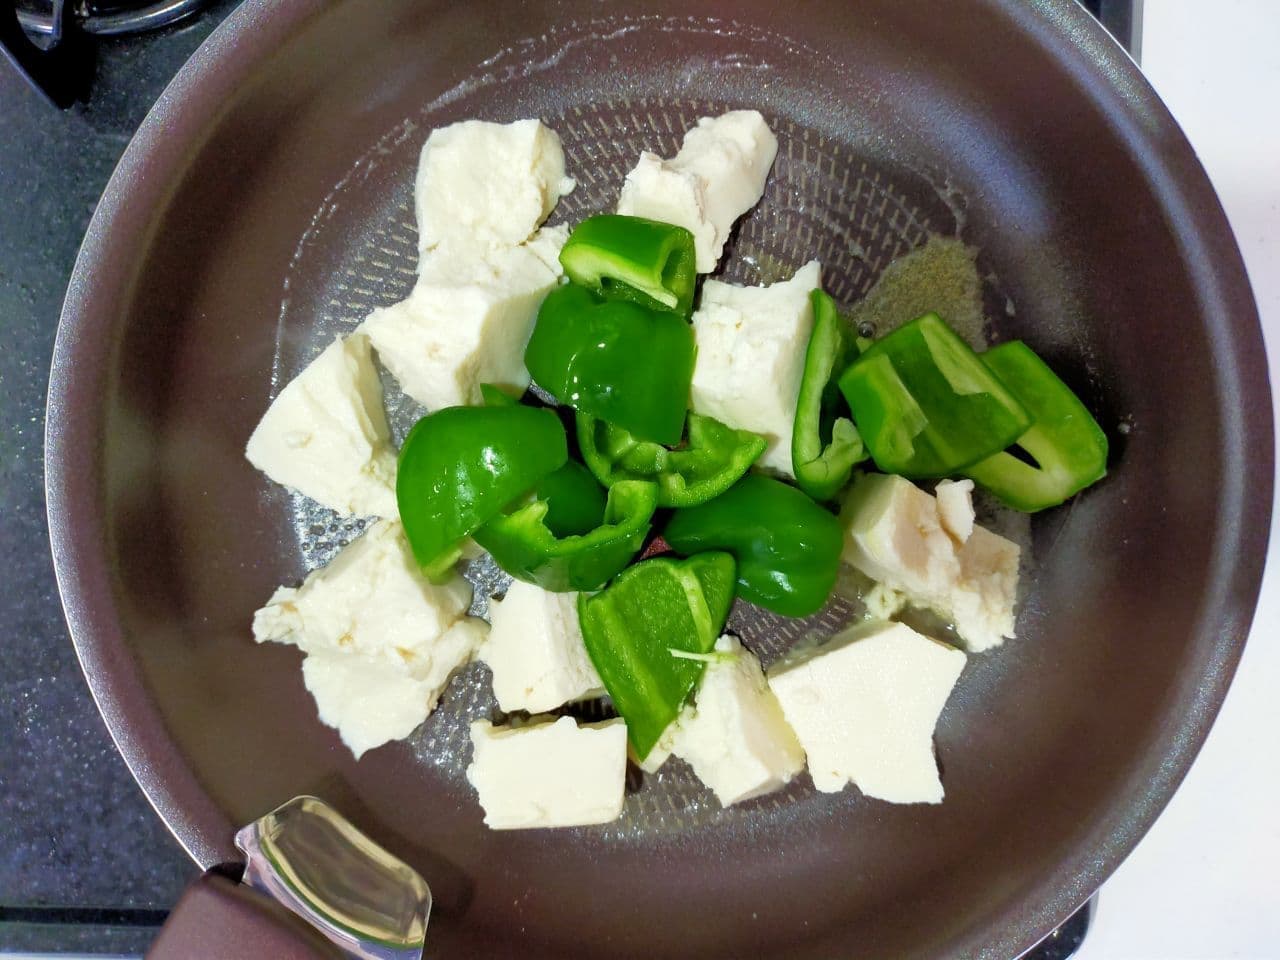 "Peppers and tofu oyster butter" recipe